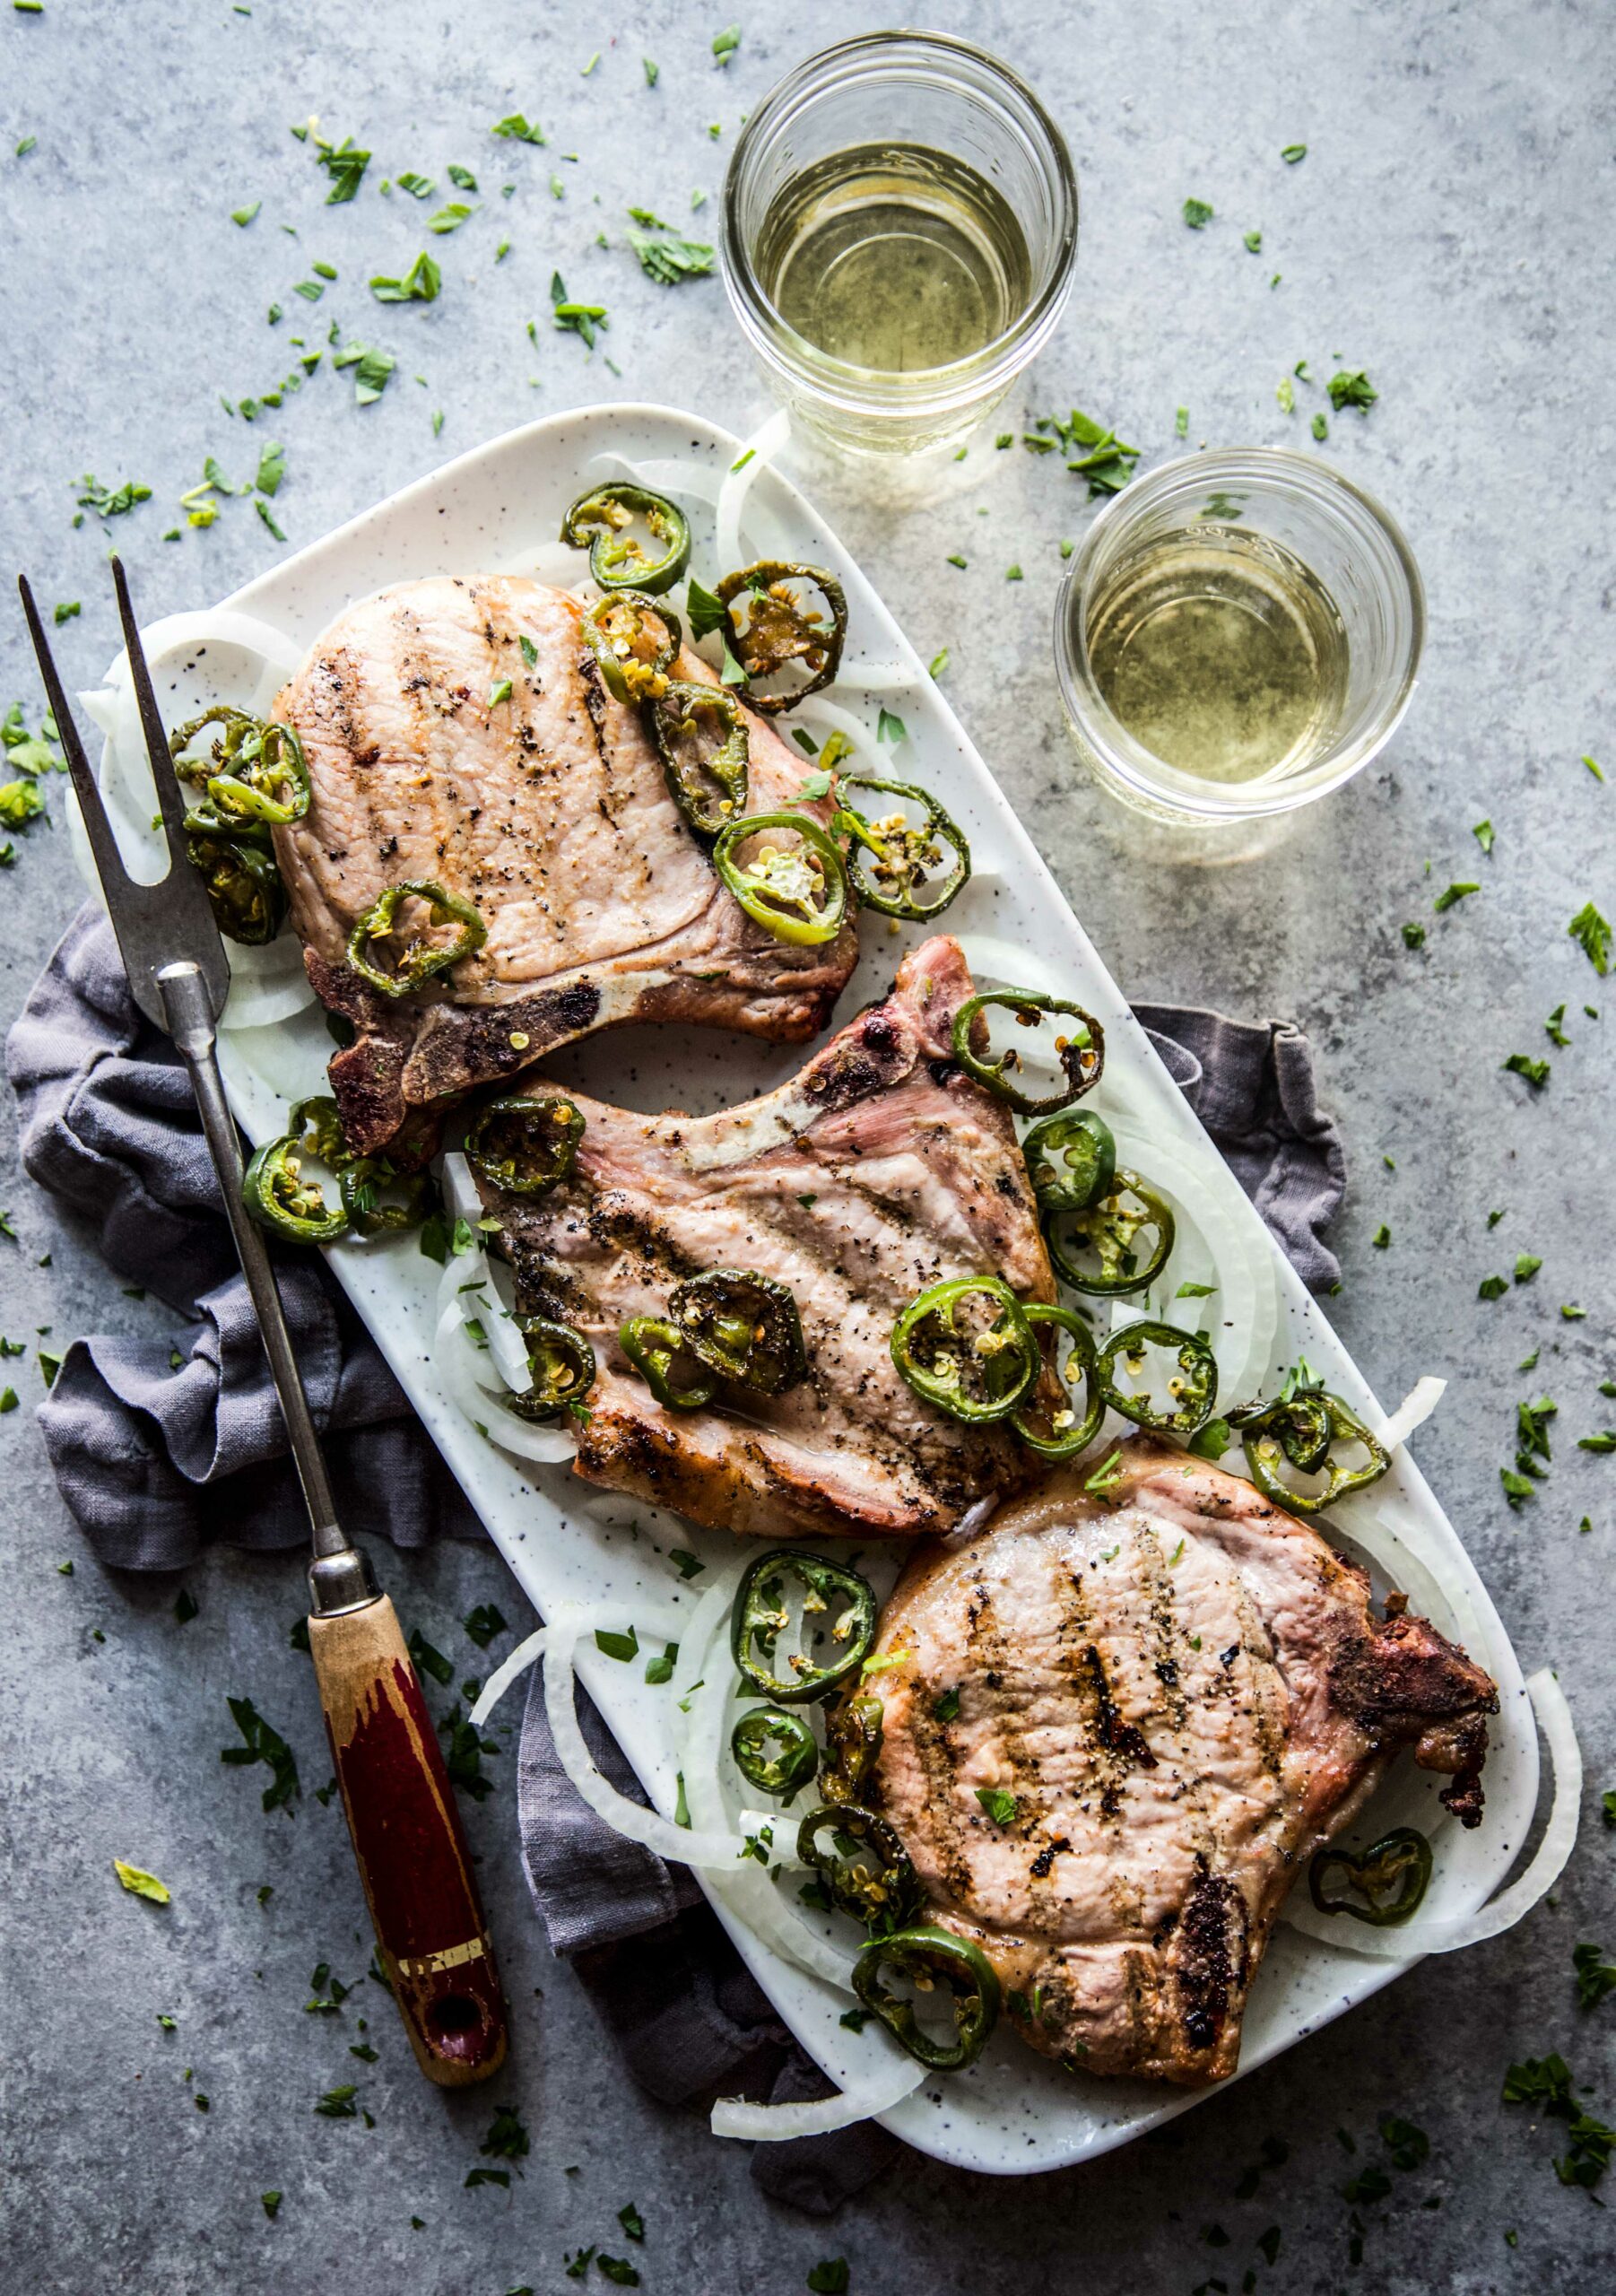 How To Marinate & Grill Pork Chops